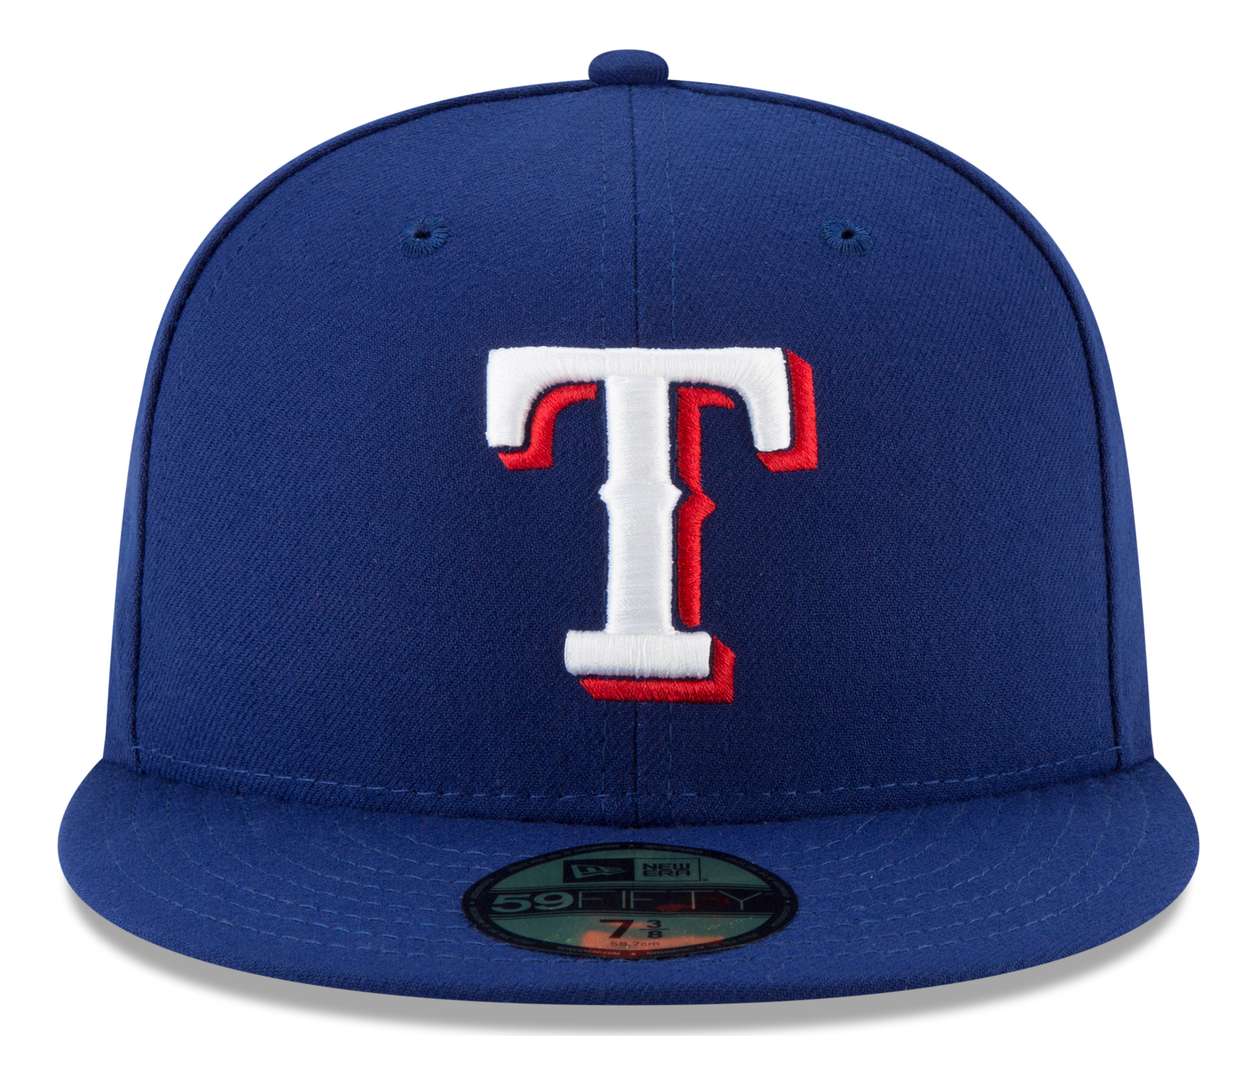 New Era - MLB Texas Rangers Authentic Collection 59Fifty Fitted Cap - Blau